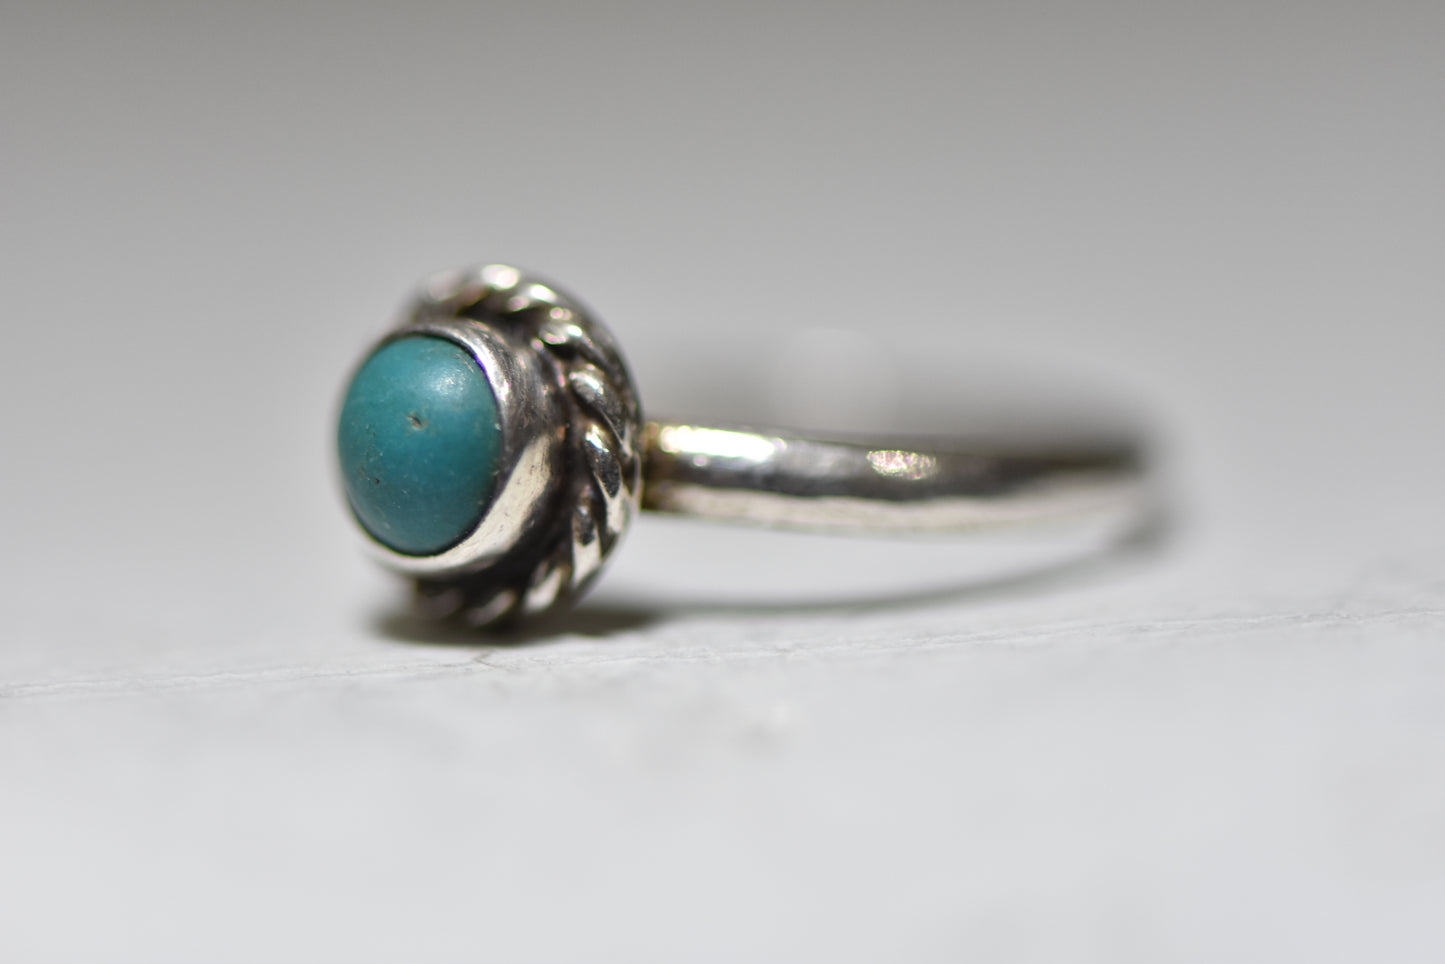 turquoise ring stacker pinky band sterling silver women girls children j